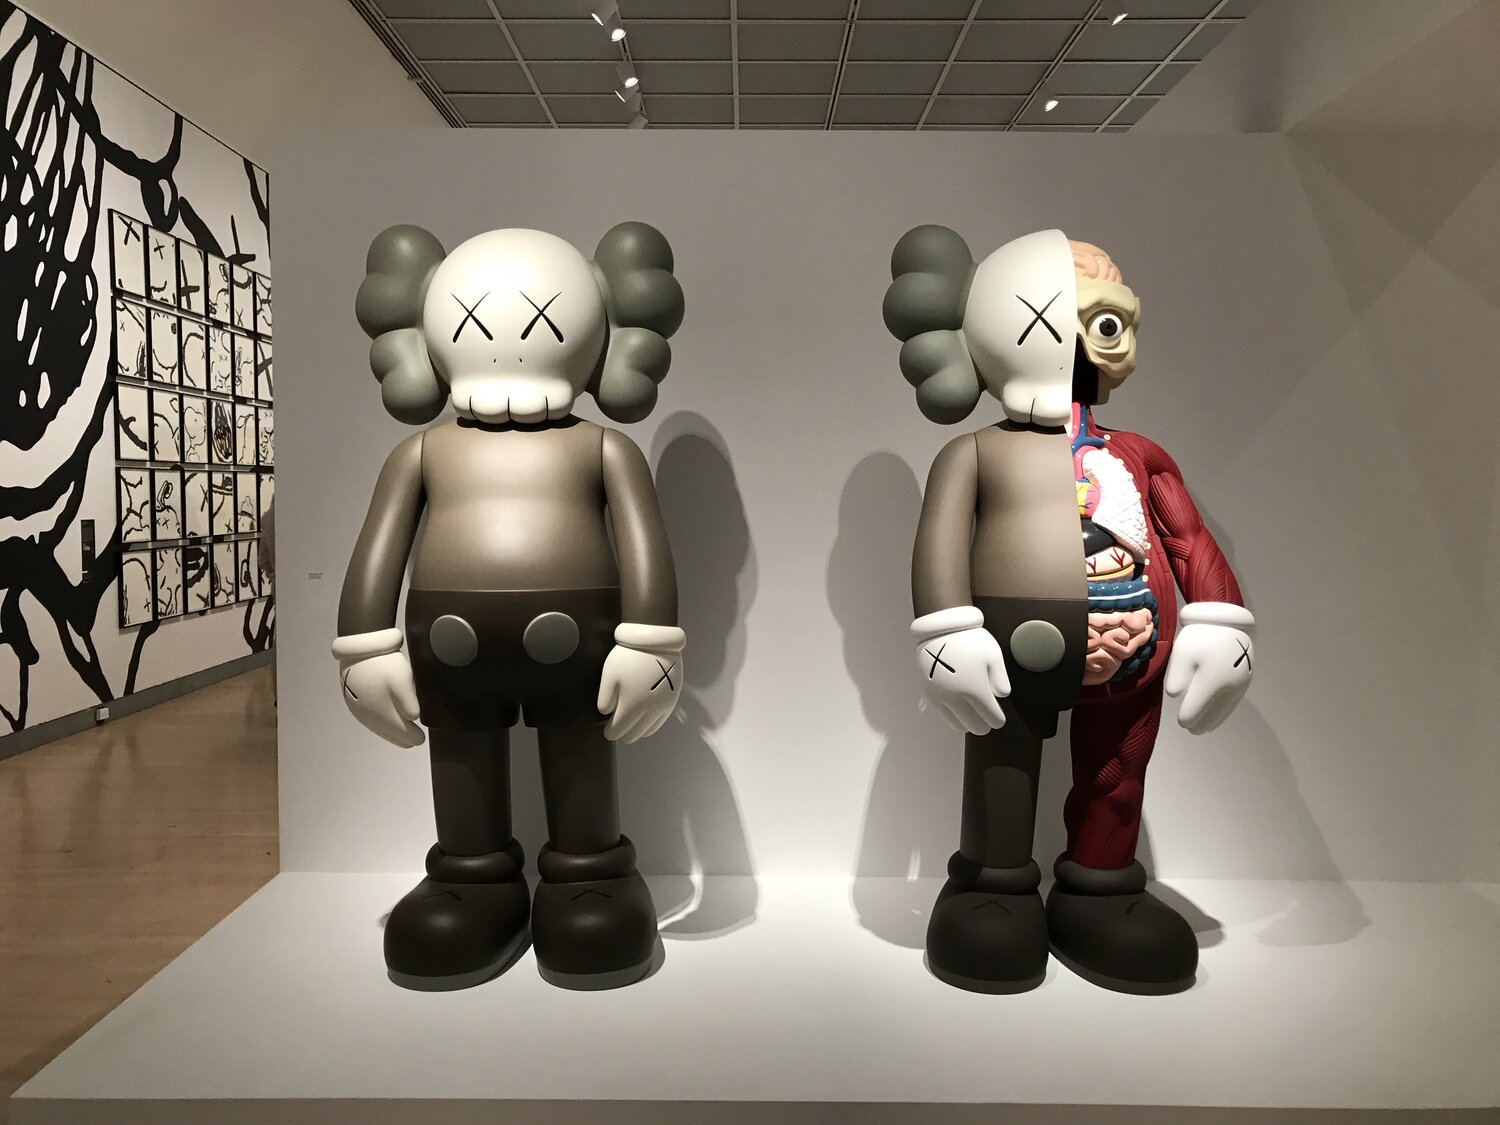 Kaws: Reinventing Appropriation